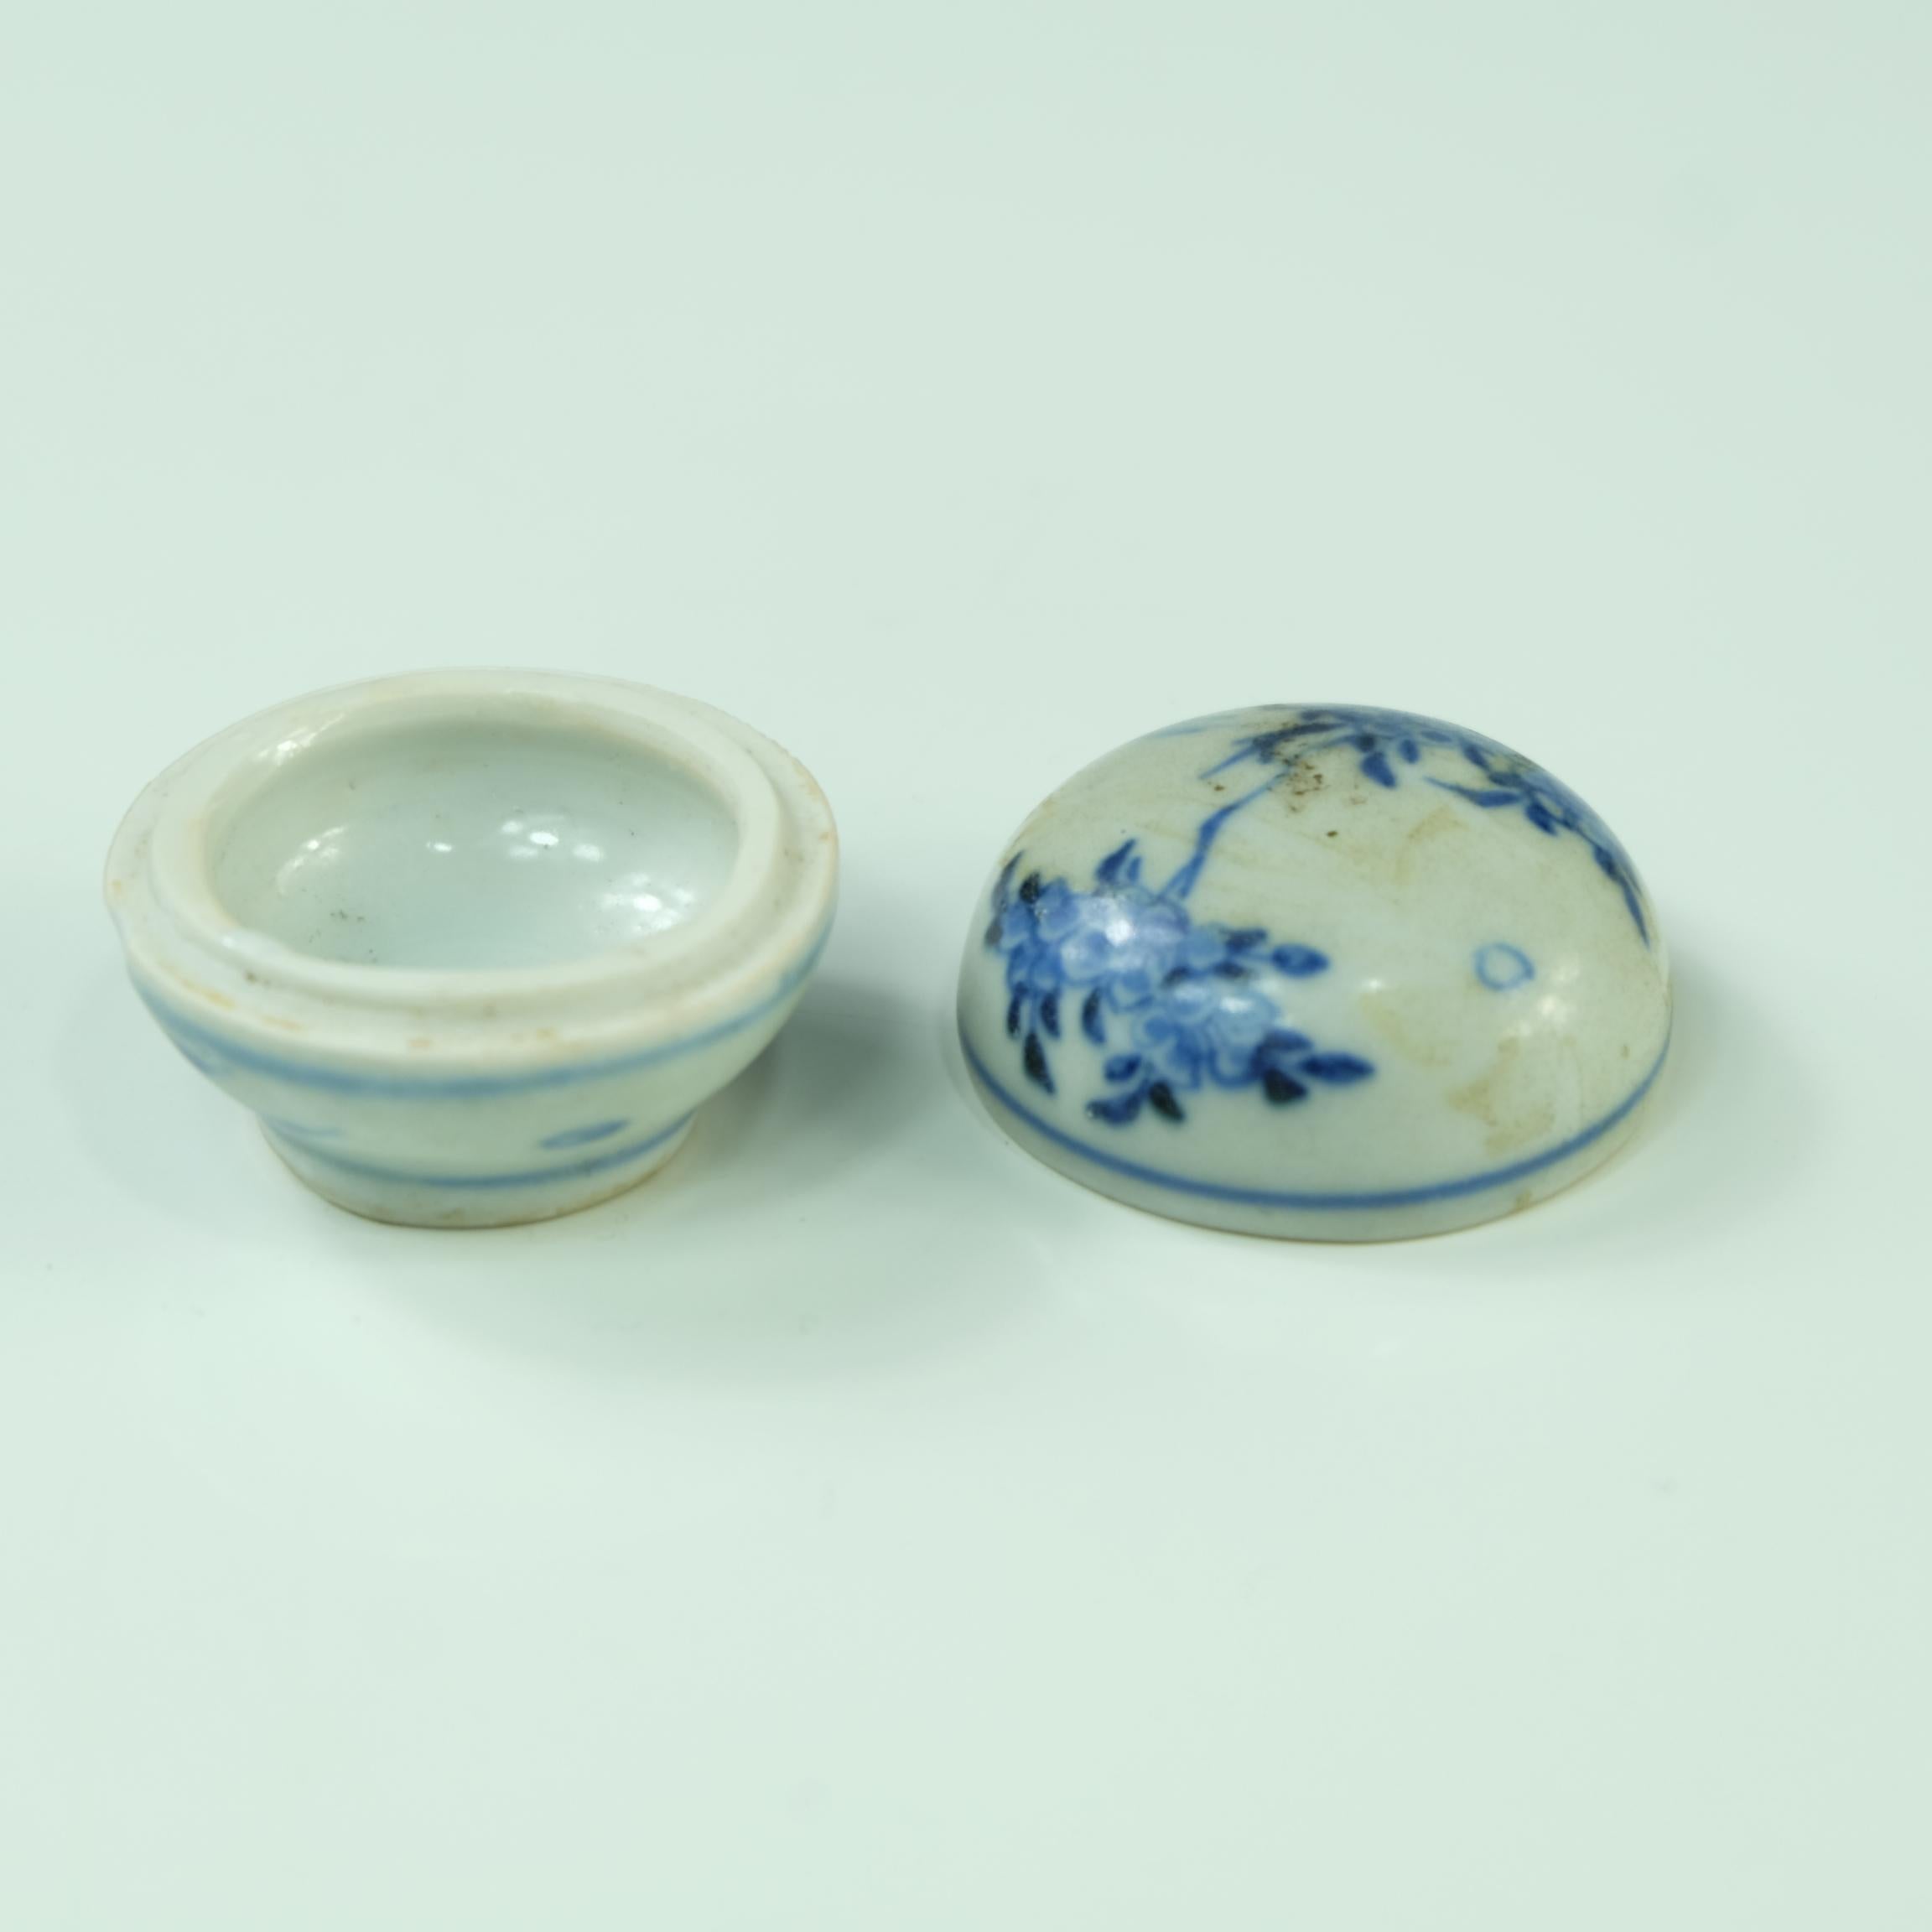 Ming Porcelain Medicinal Pill Box from the 'the Hatcher Junk circa 1643-1646' For Sale